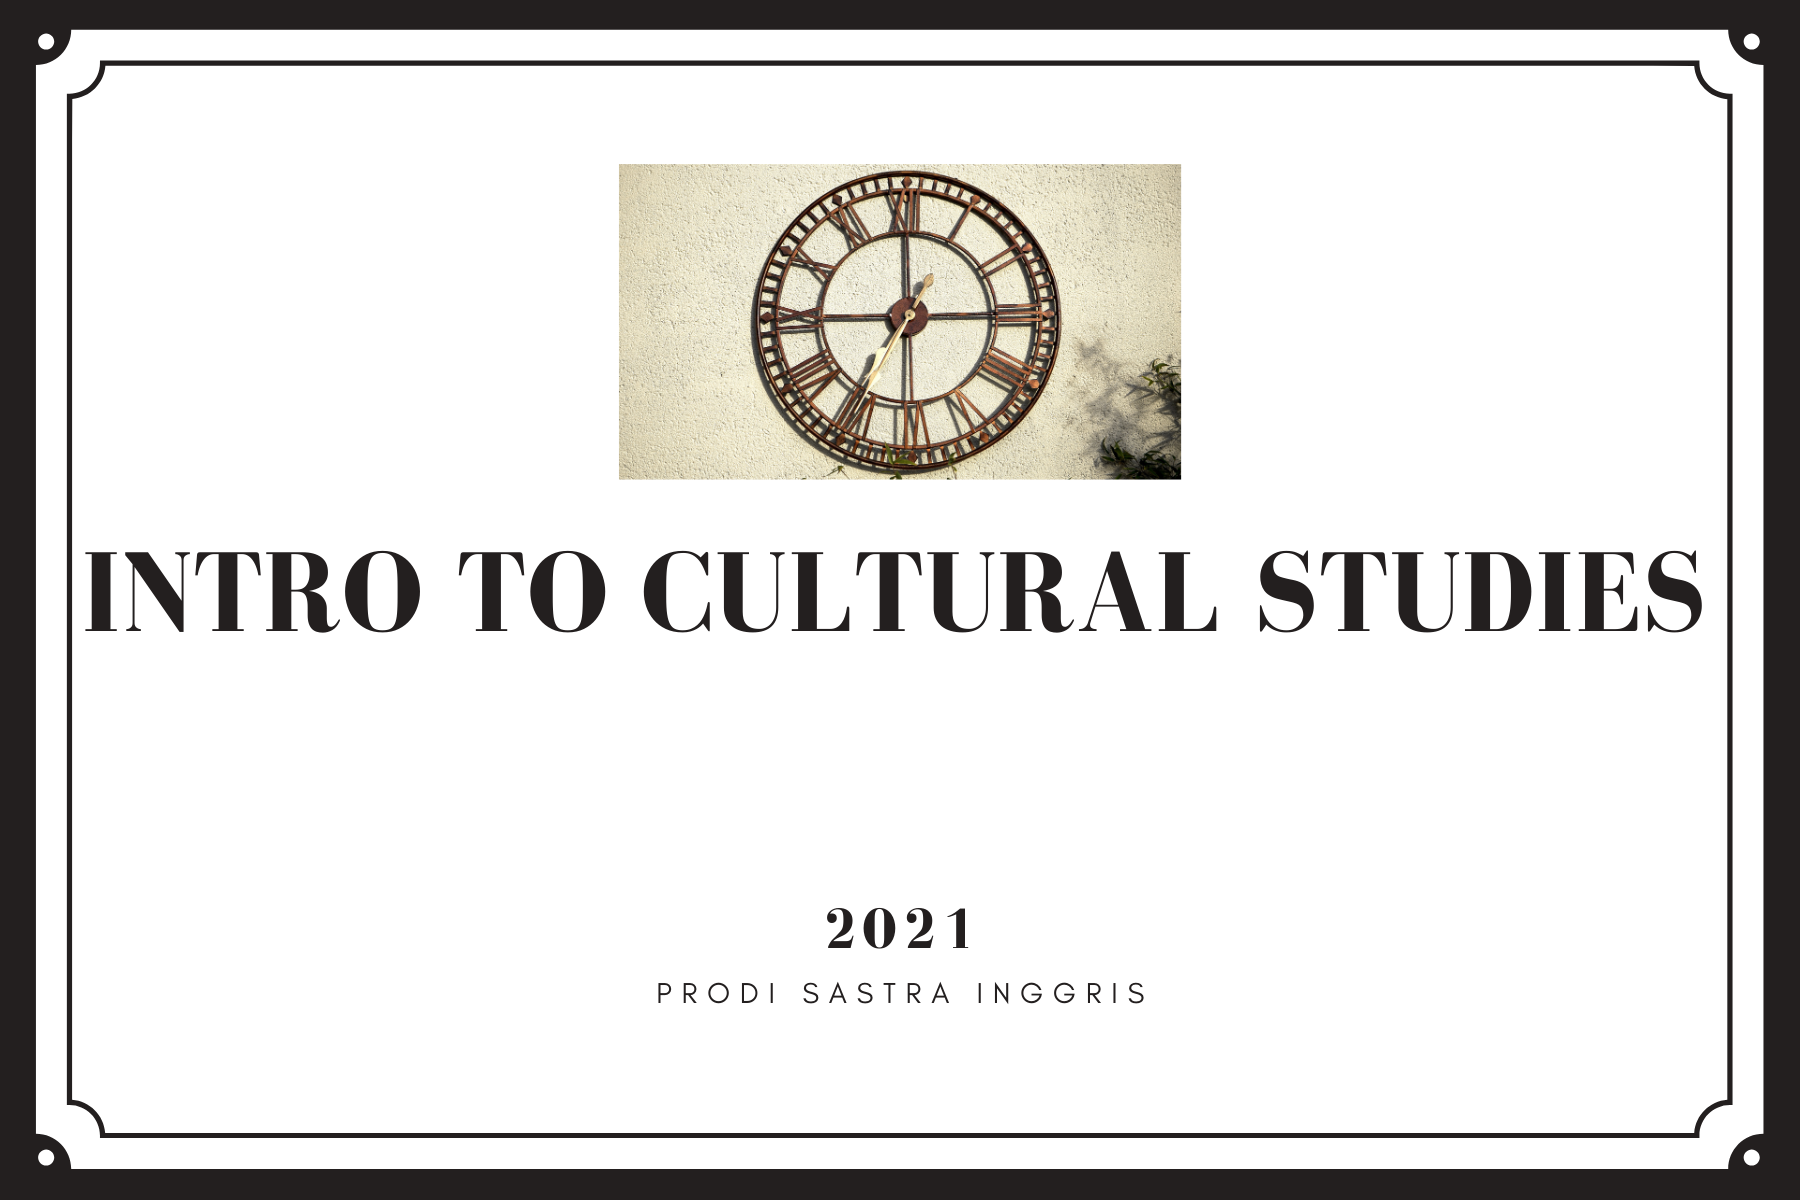 Intro to Cultural Studies